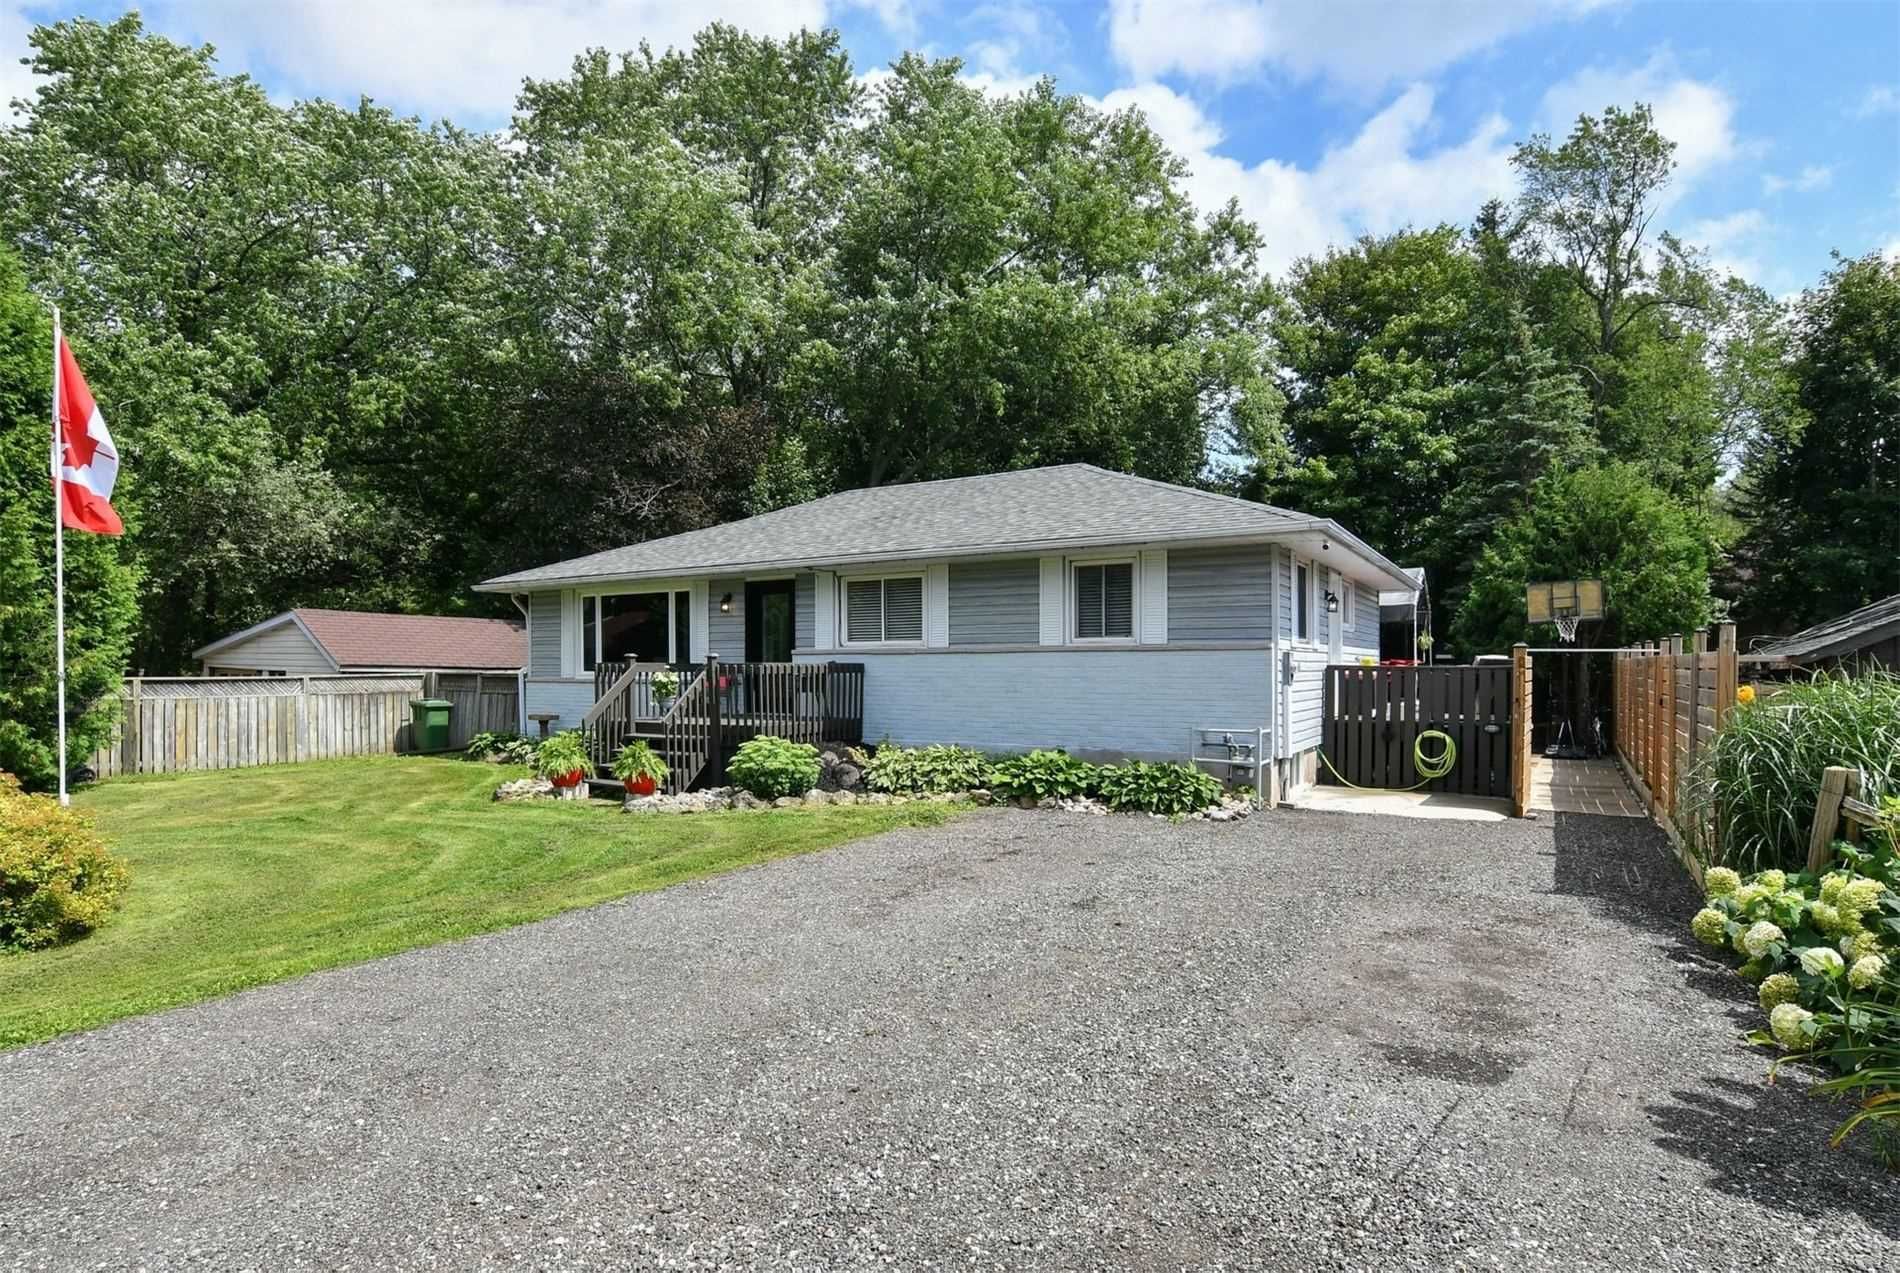 Main Photo: 61 E William Street in Caledon: Rural Caledon House (Bungalow) for sale : MLS®# W5342914